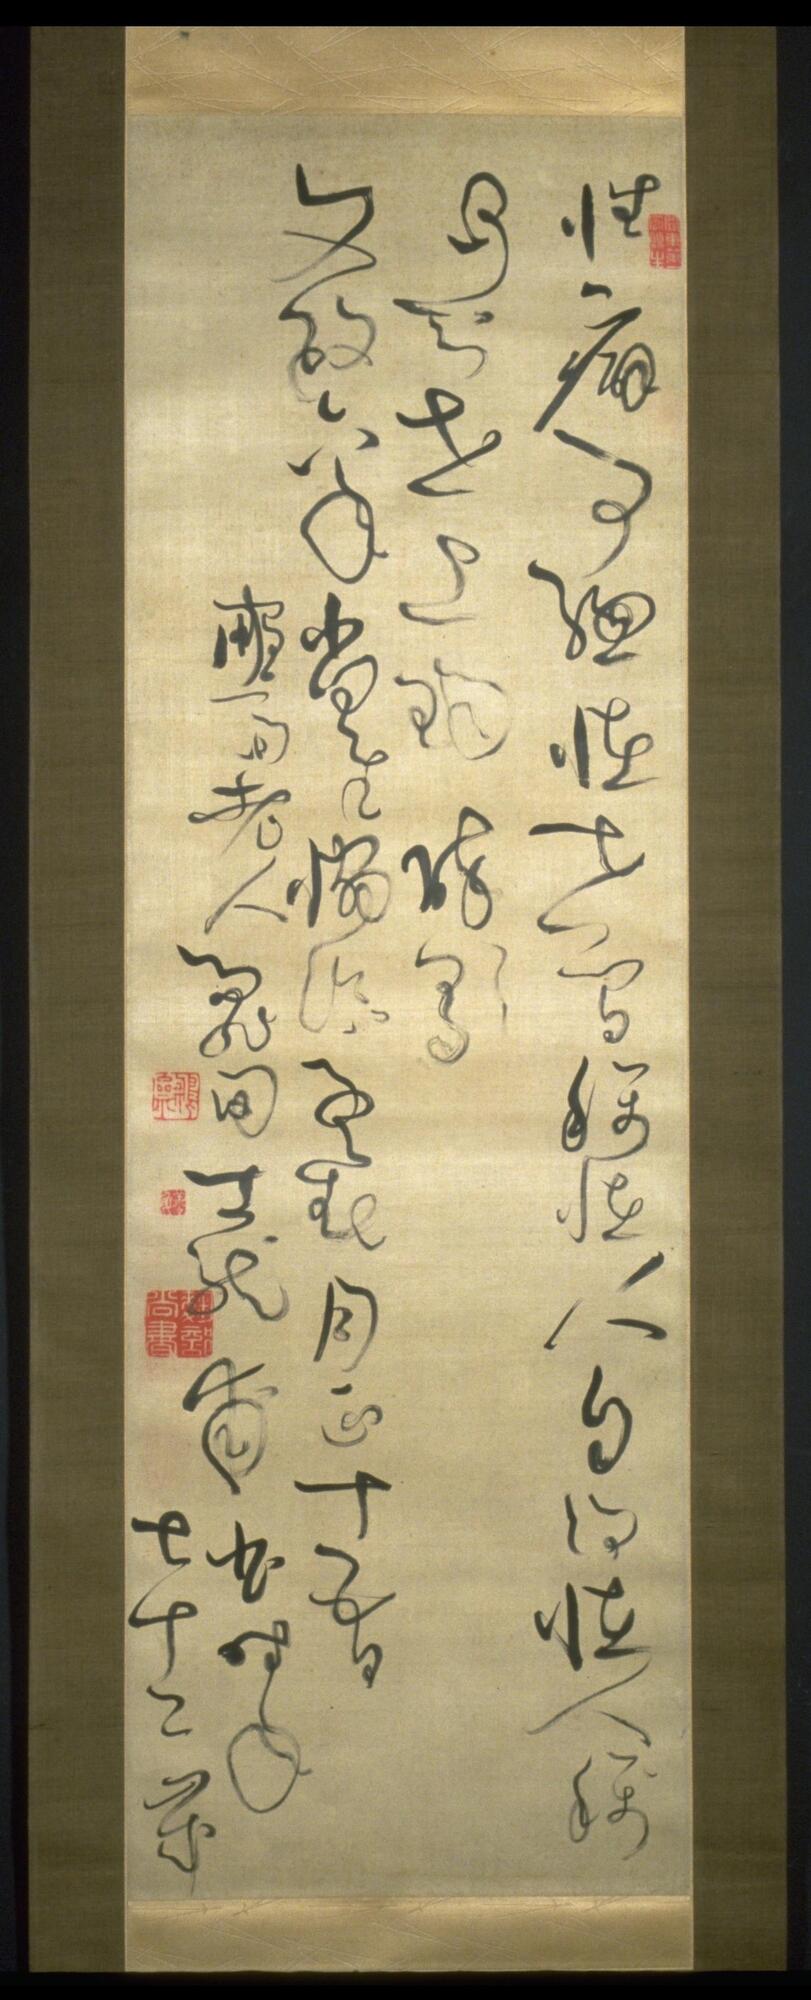 A long hanging scroll with stamps in the top right and middle left of the scroll. The five lines of characters are very shaky.